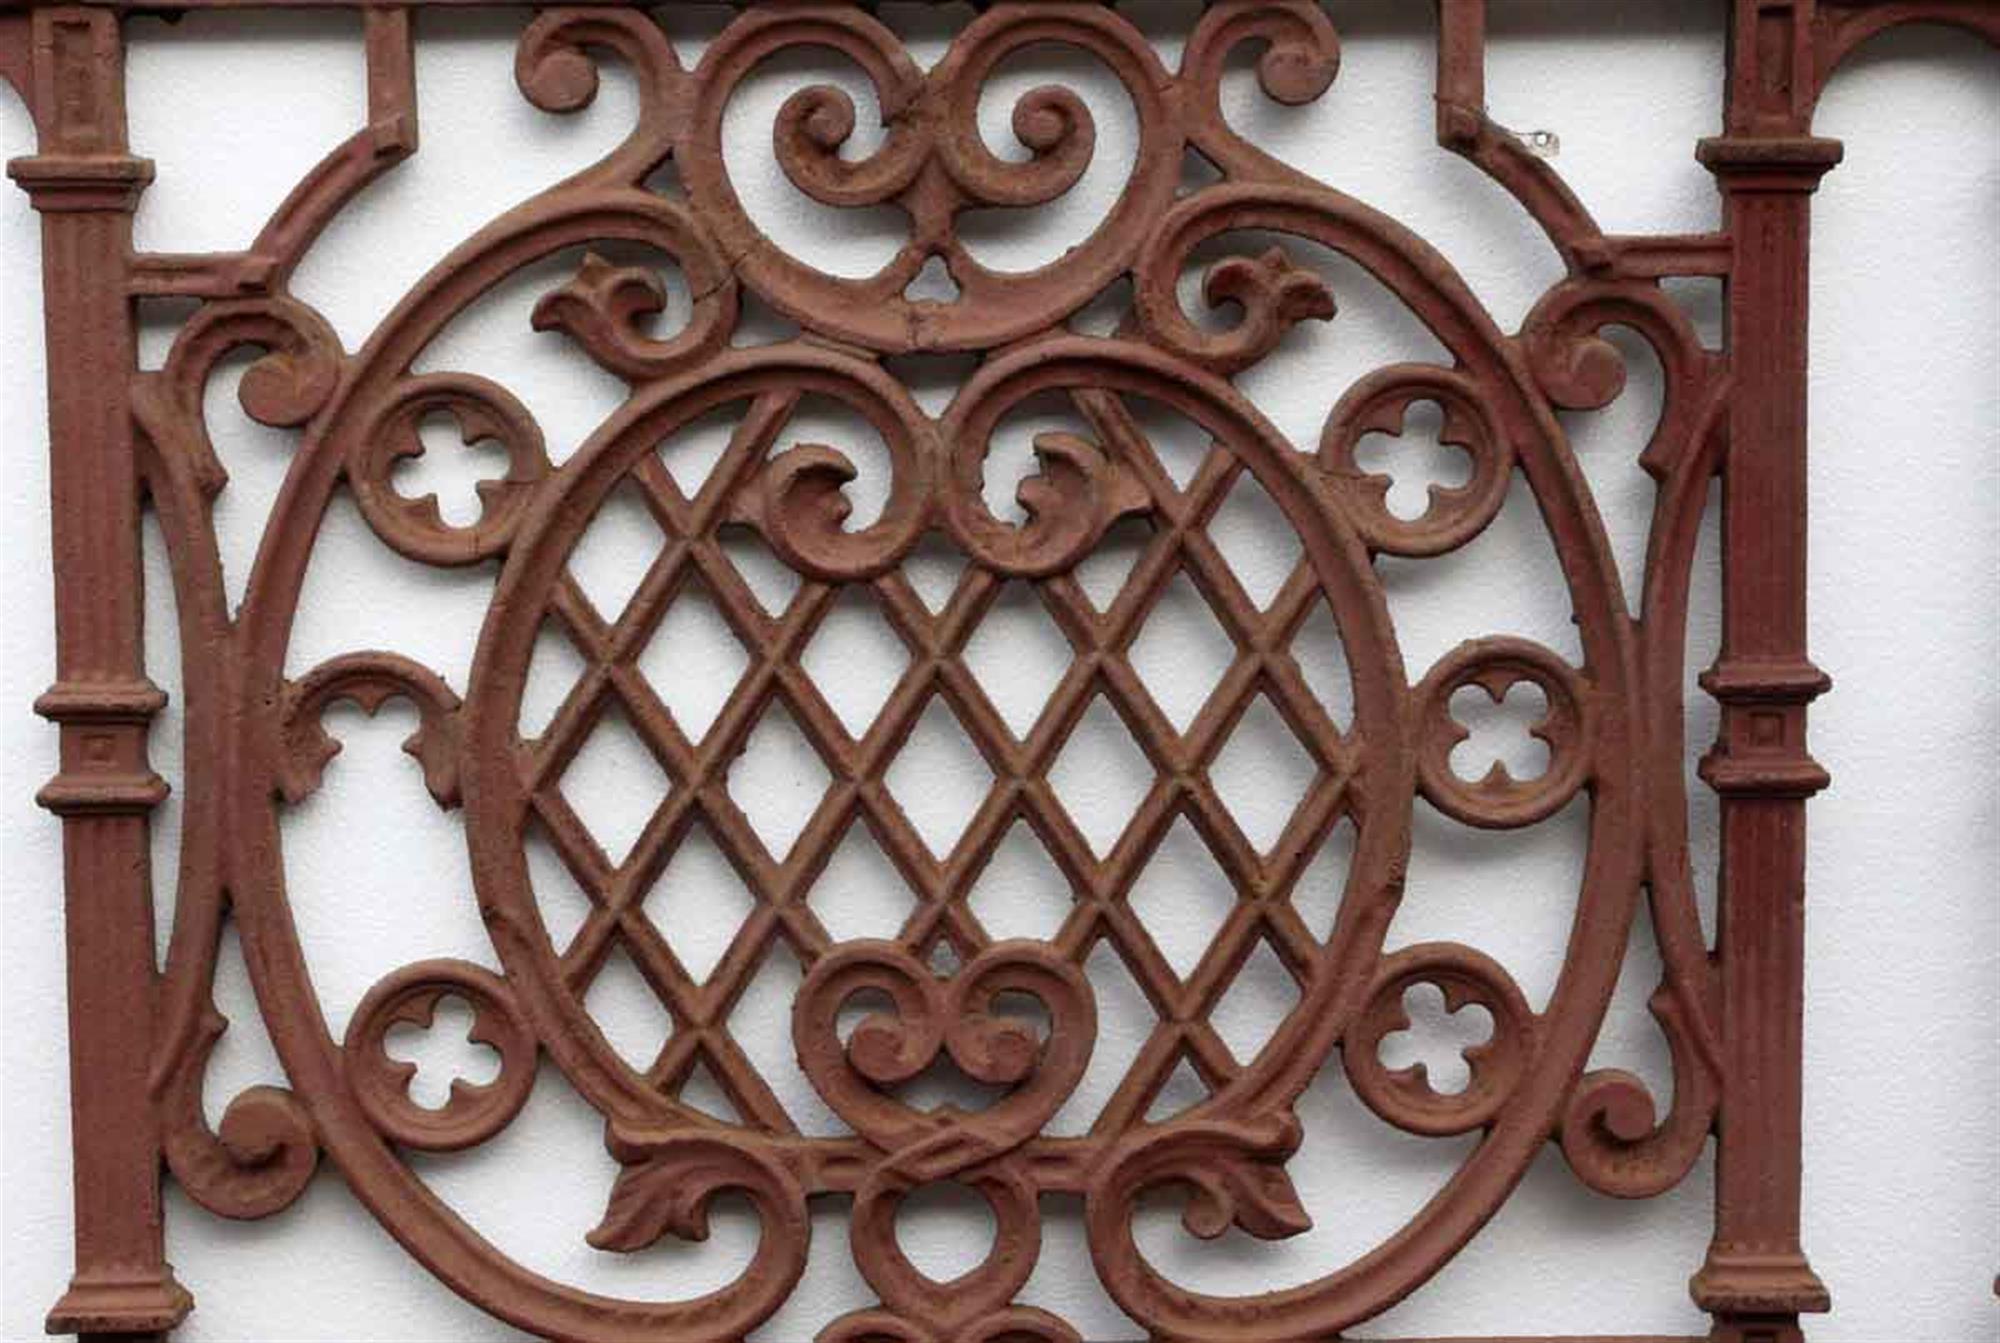 1910 cast iron balcony with a red finish and decorative quatrefoil details. This can be seen at our 400 Gilligan St location in Scranton, PA.